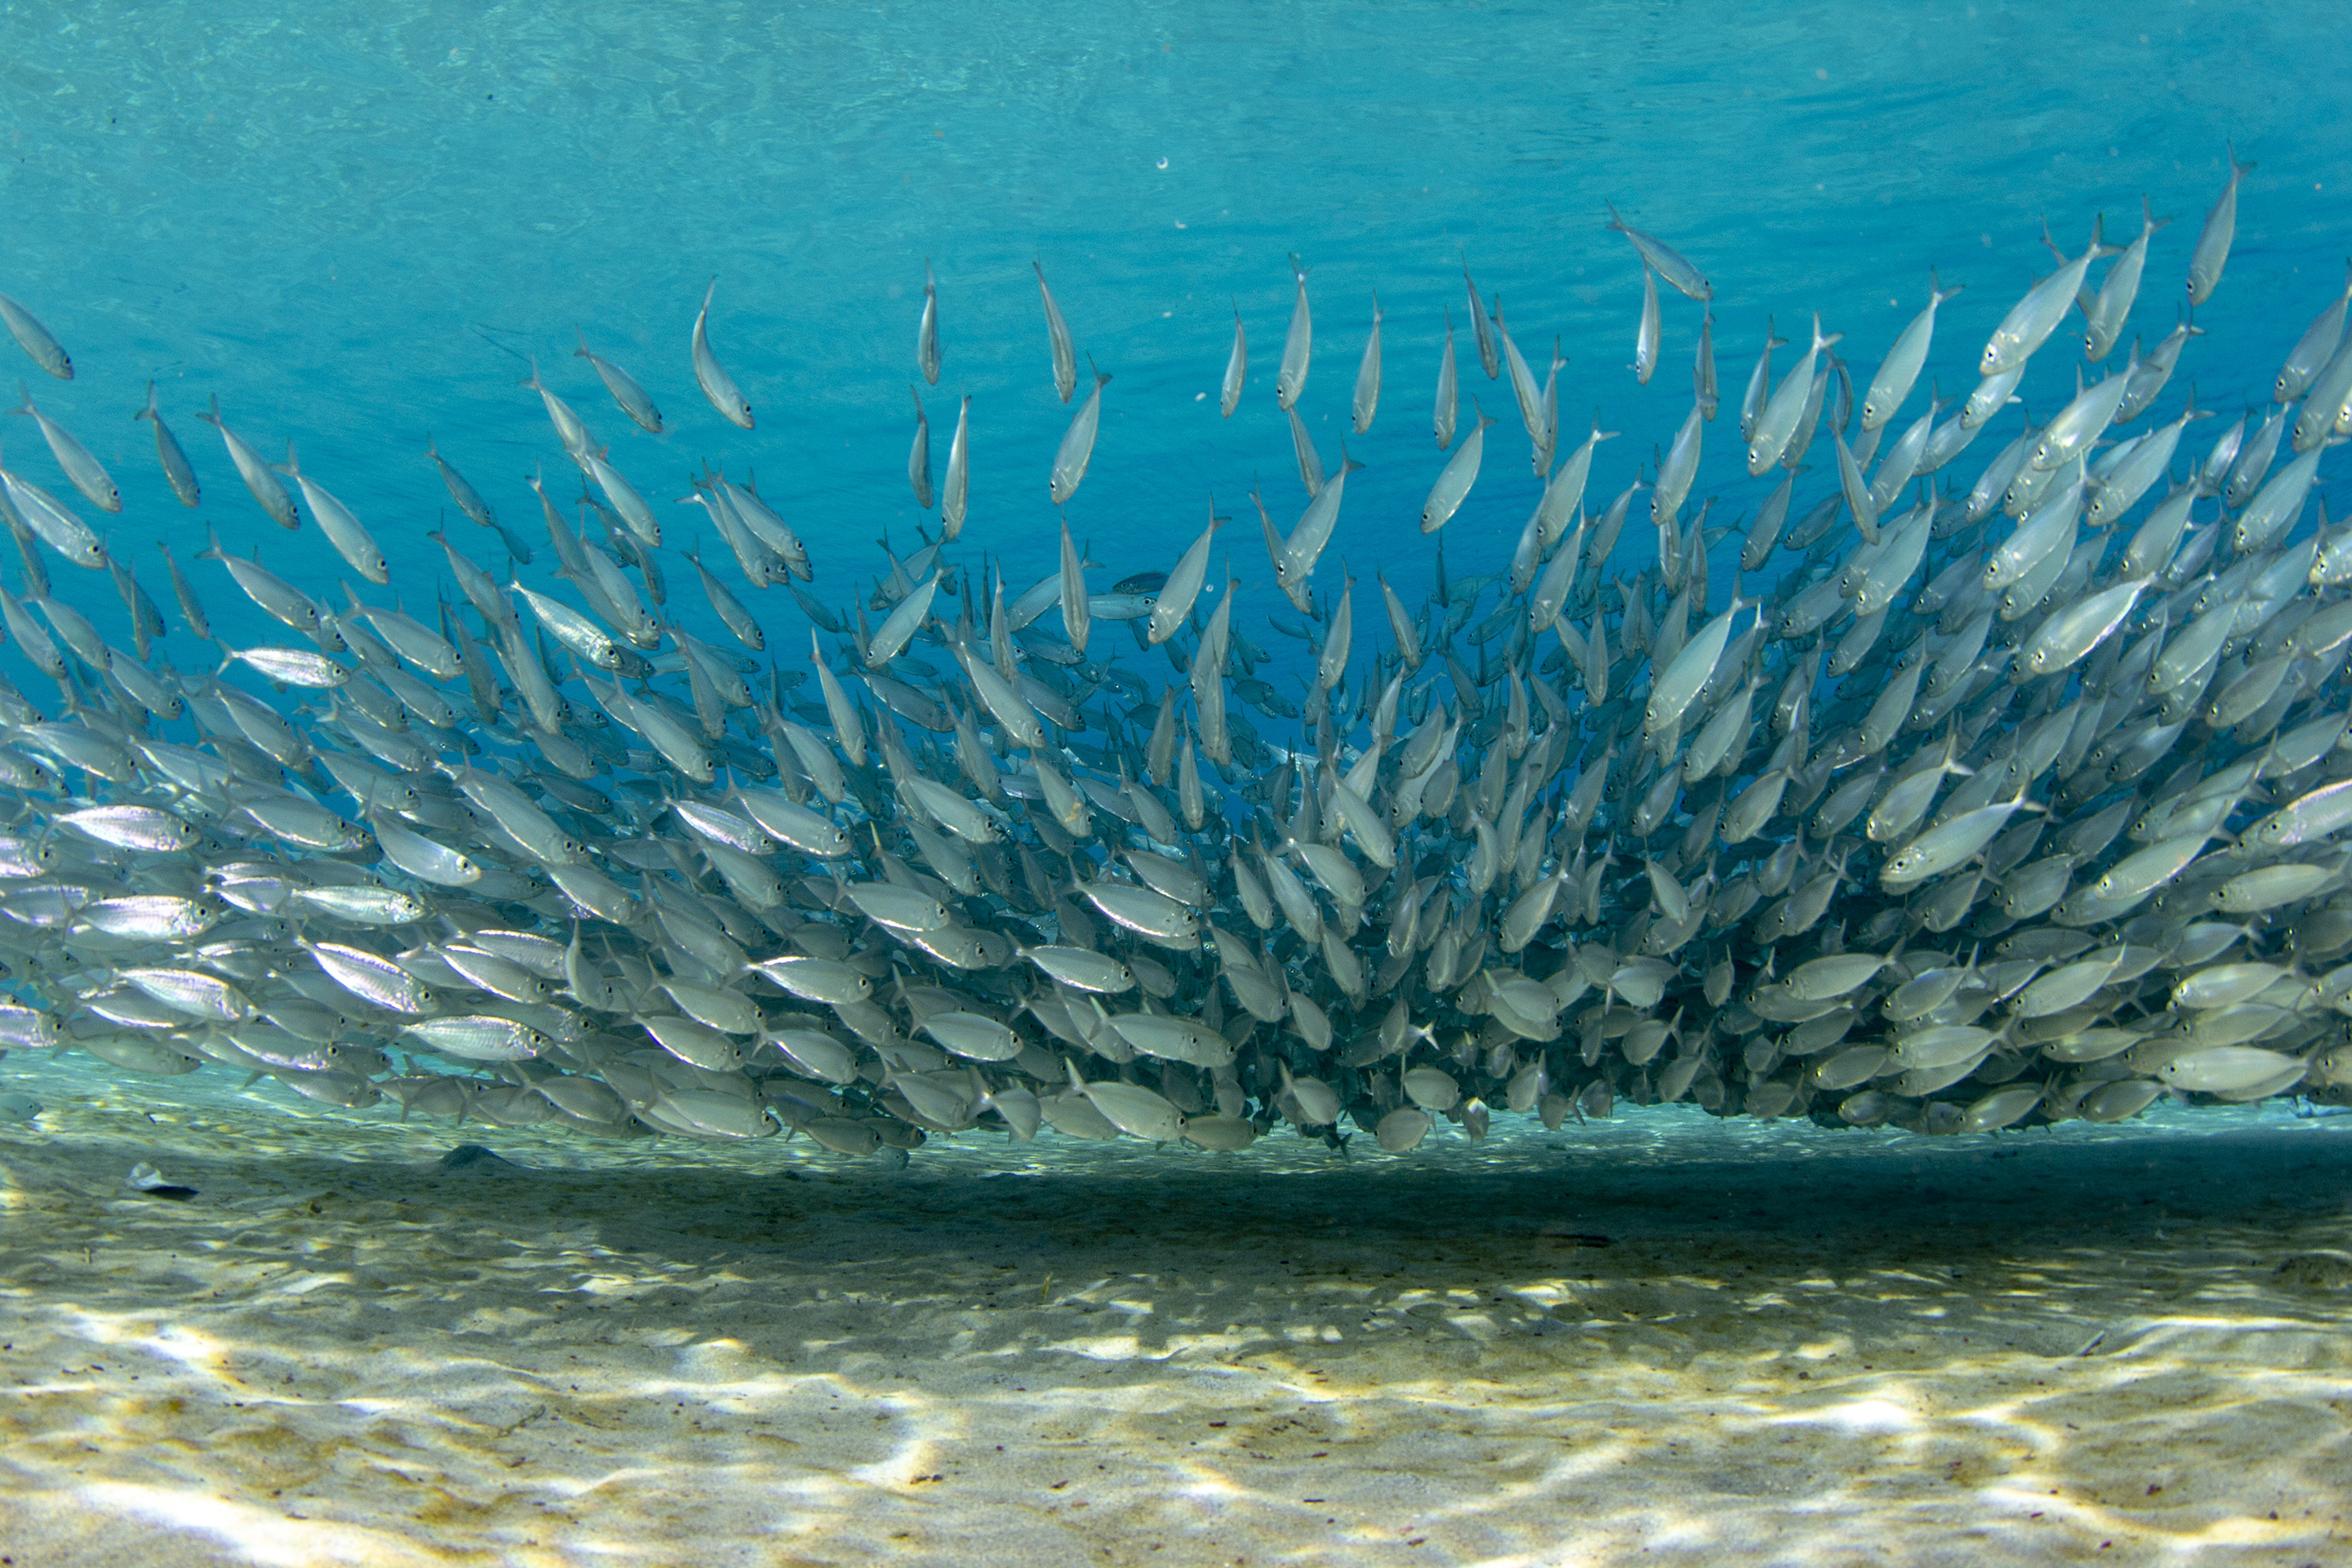 Schools of fish in the shallows of Playa Grandi, Curacao